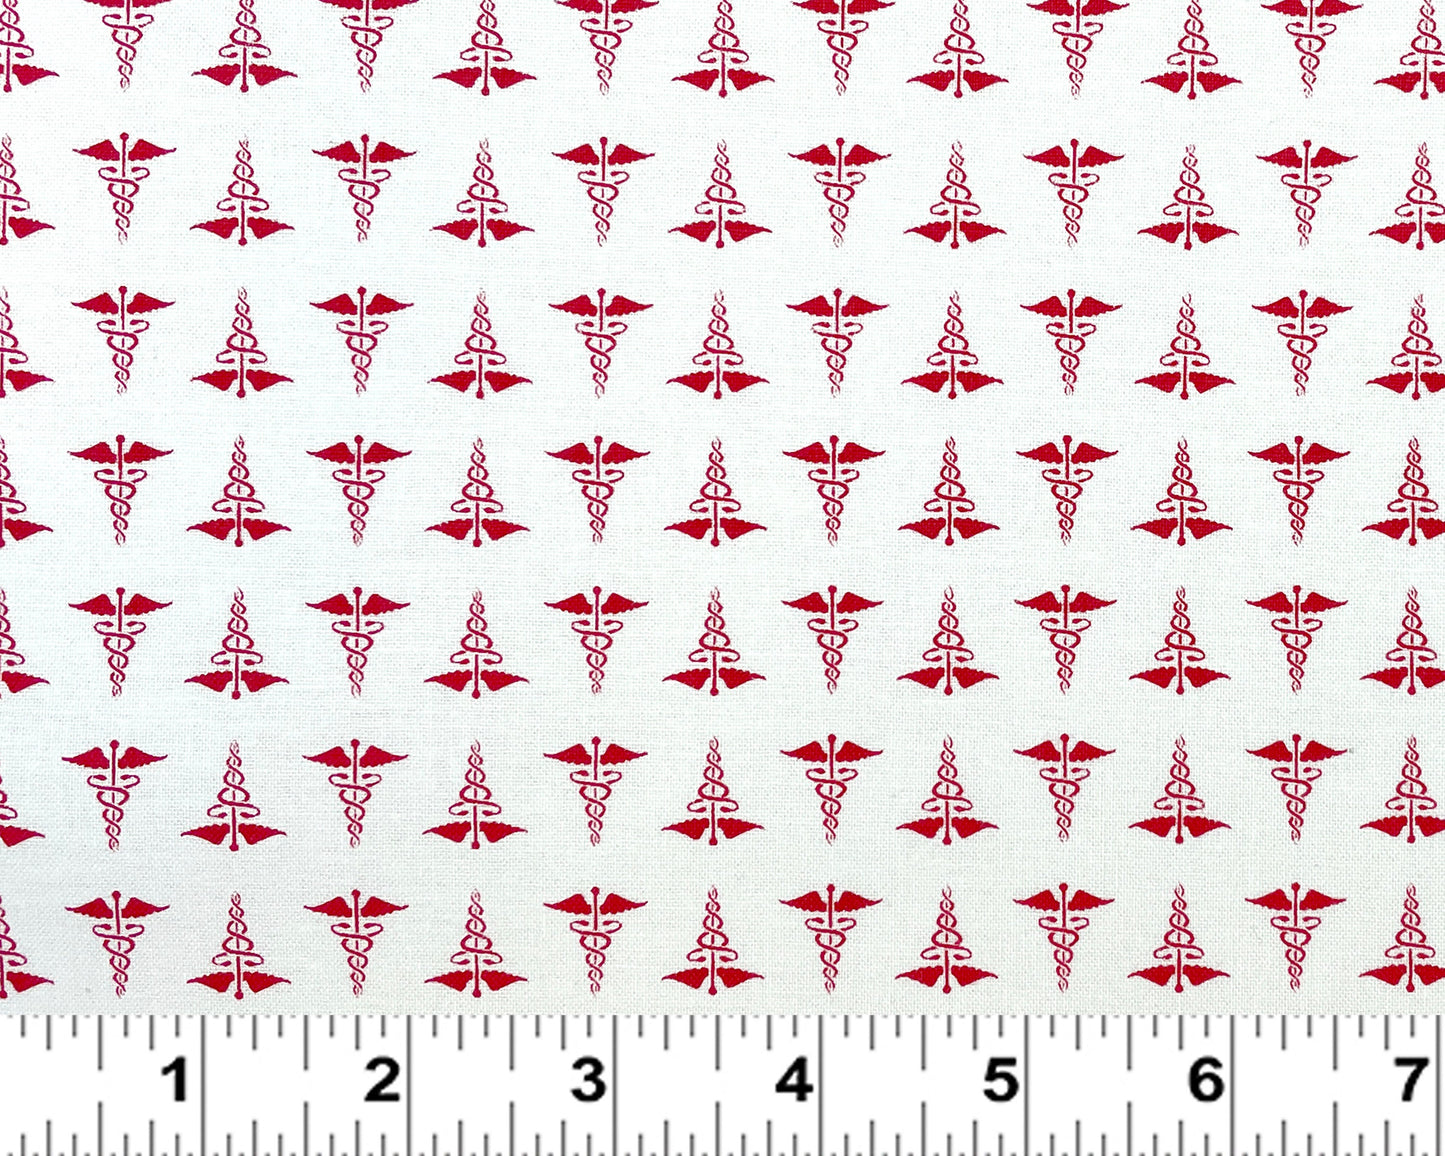 Caduceus medical fabric on white - To The Rescue Collection - By Robert Giordano for Henry Glass - 100% Cotton Fabric - Ships NEXT DAY